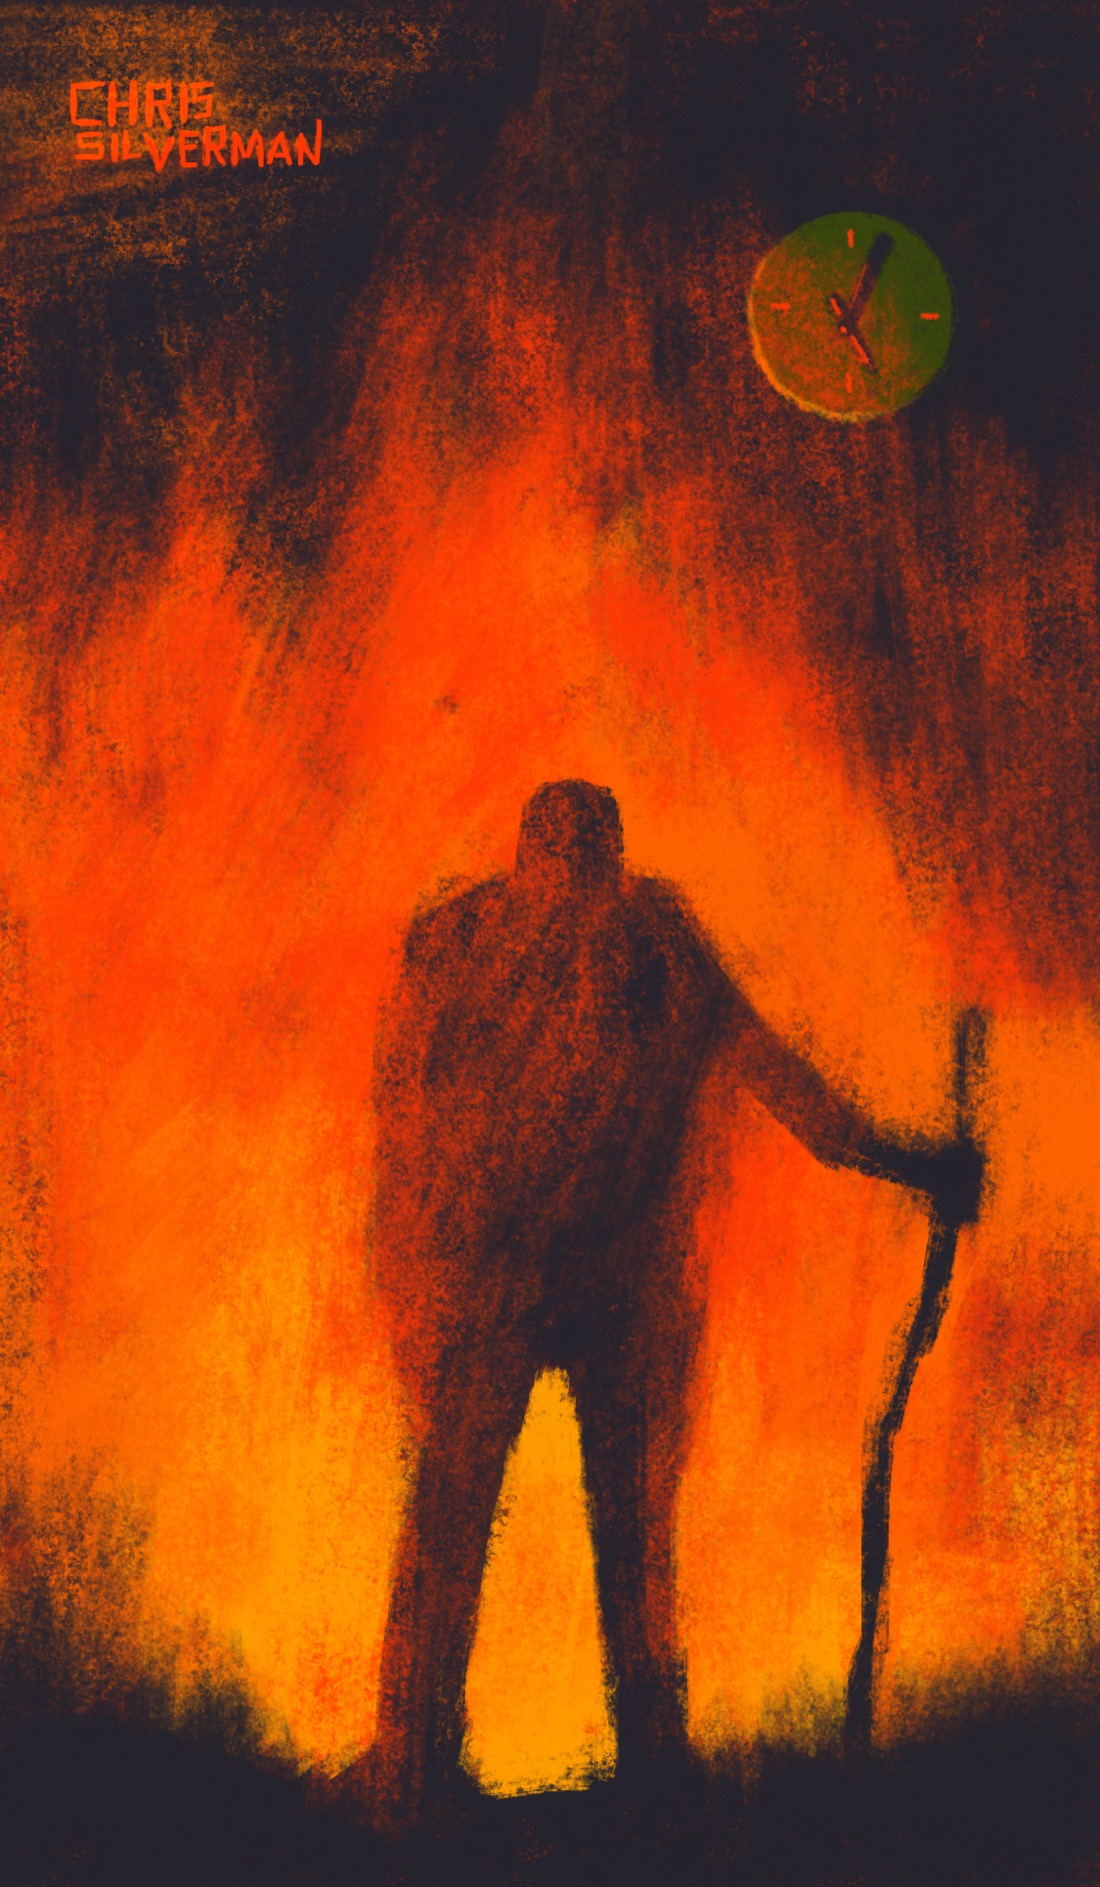 A dark figure stands in front of a roaring inferno. This is not a mere bonfire; it's a wall of flame, something only seen at the edge of a volcano or the mouth of Hell. The figure is holding a staff, staring into the flames. In the top right is a circular analog clock, displaying 5:05. It's time to get up or it's time for a drink, your choice.